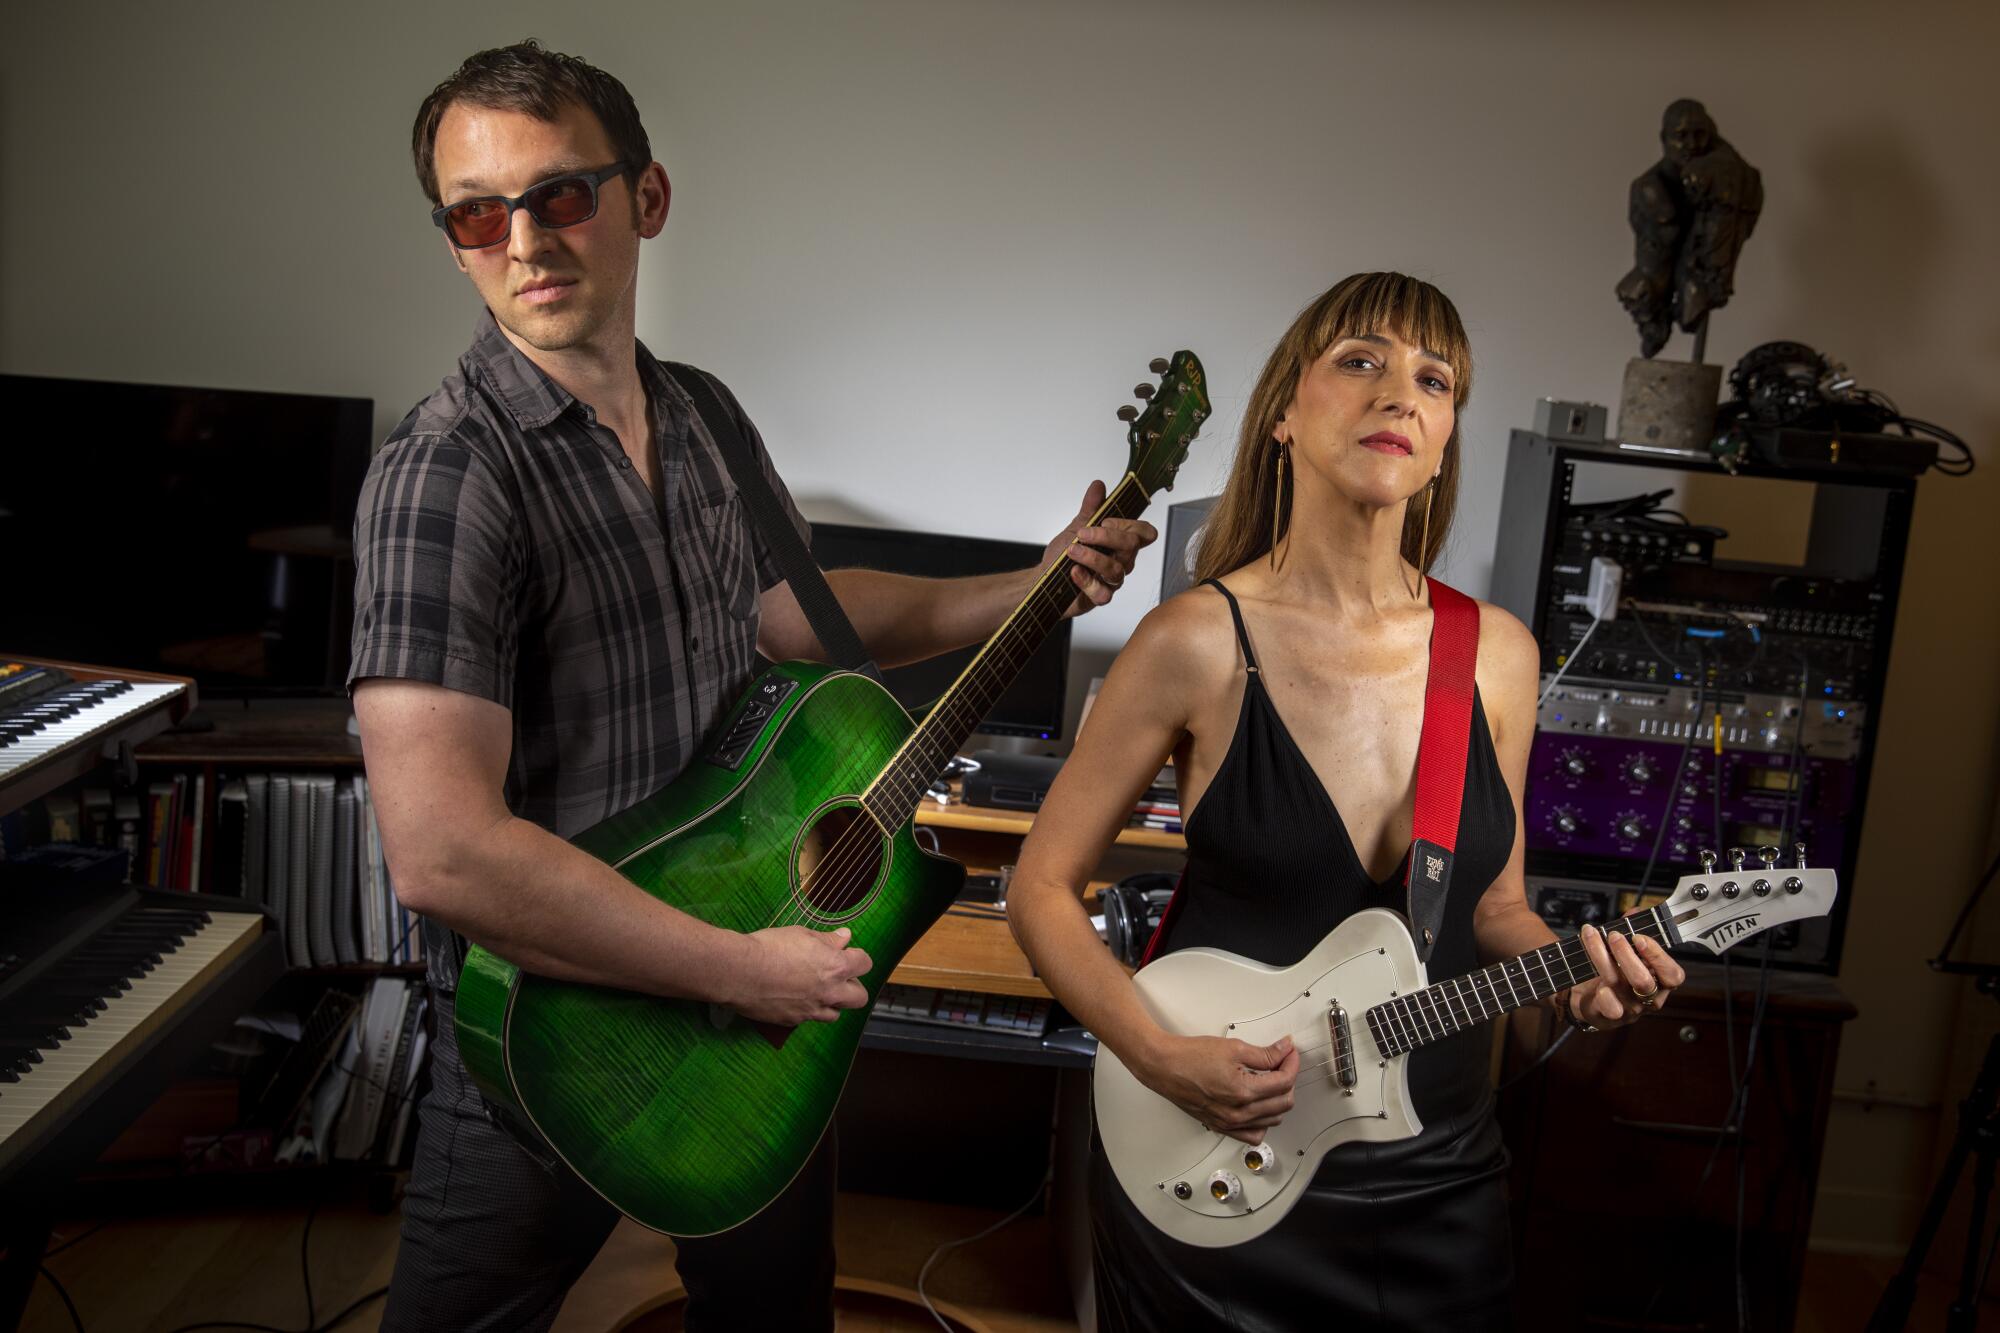 A man holding a green guitar and a woman strumming a white guitar